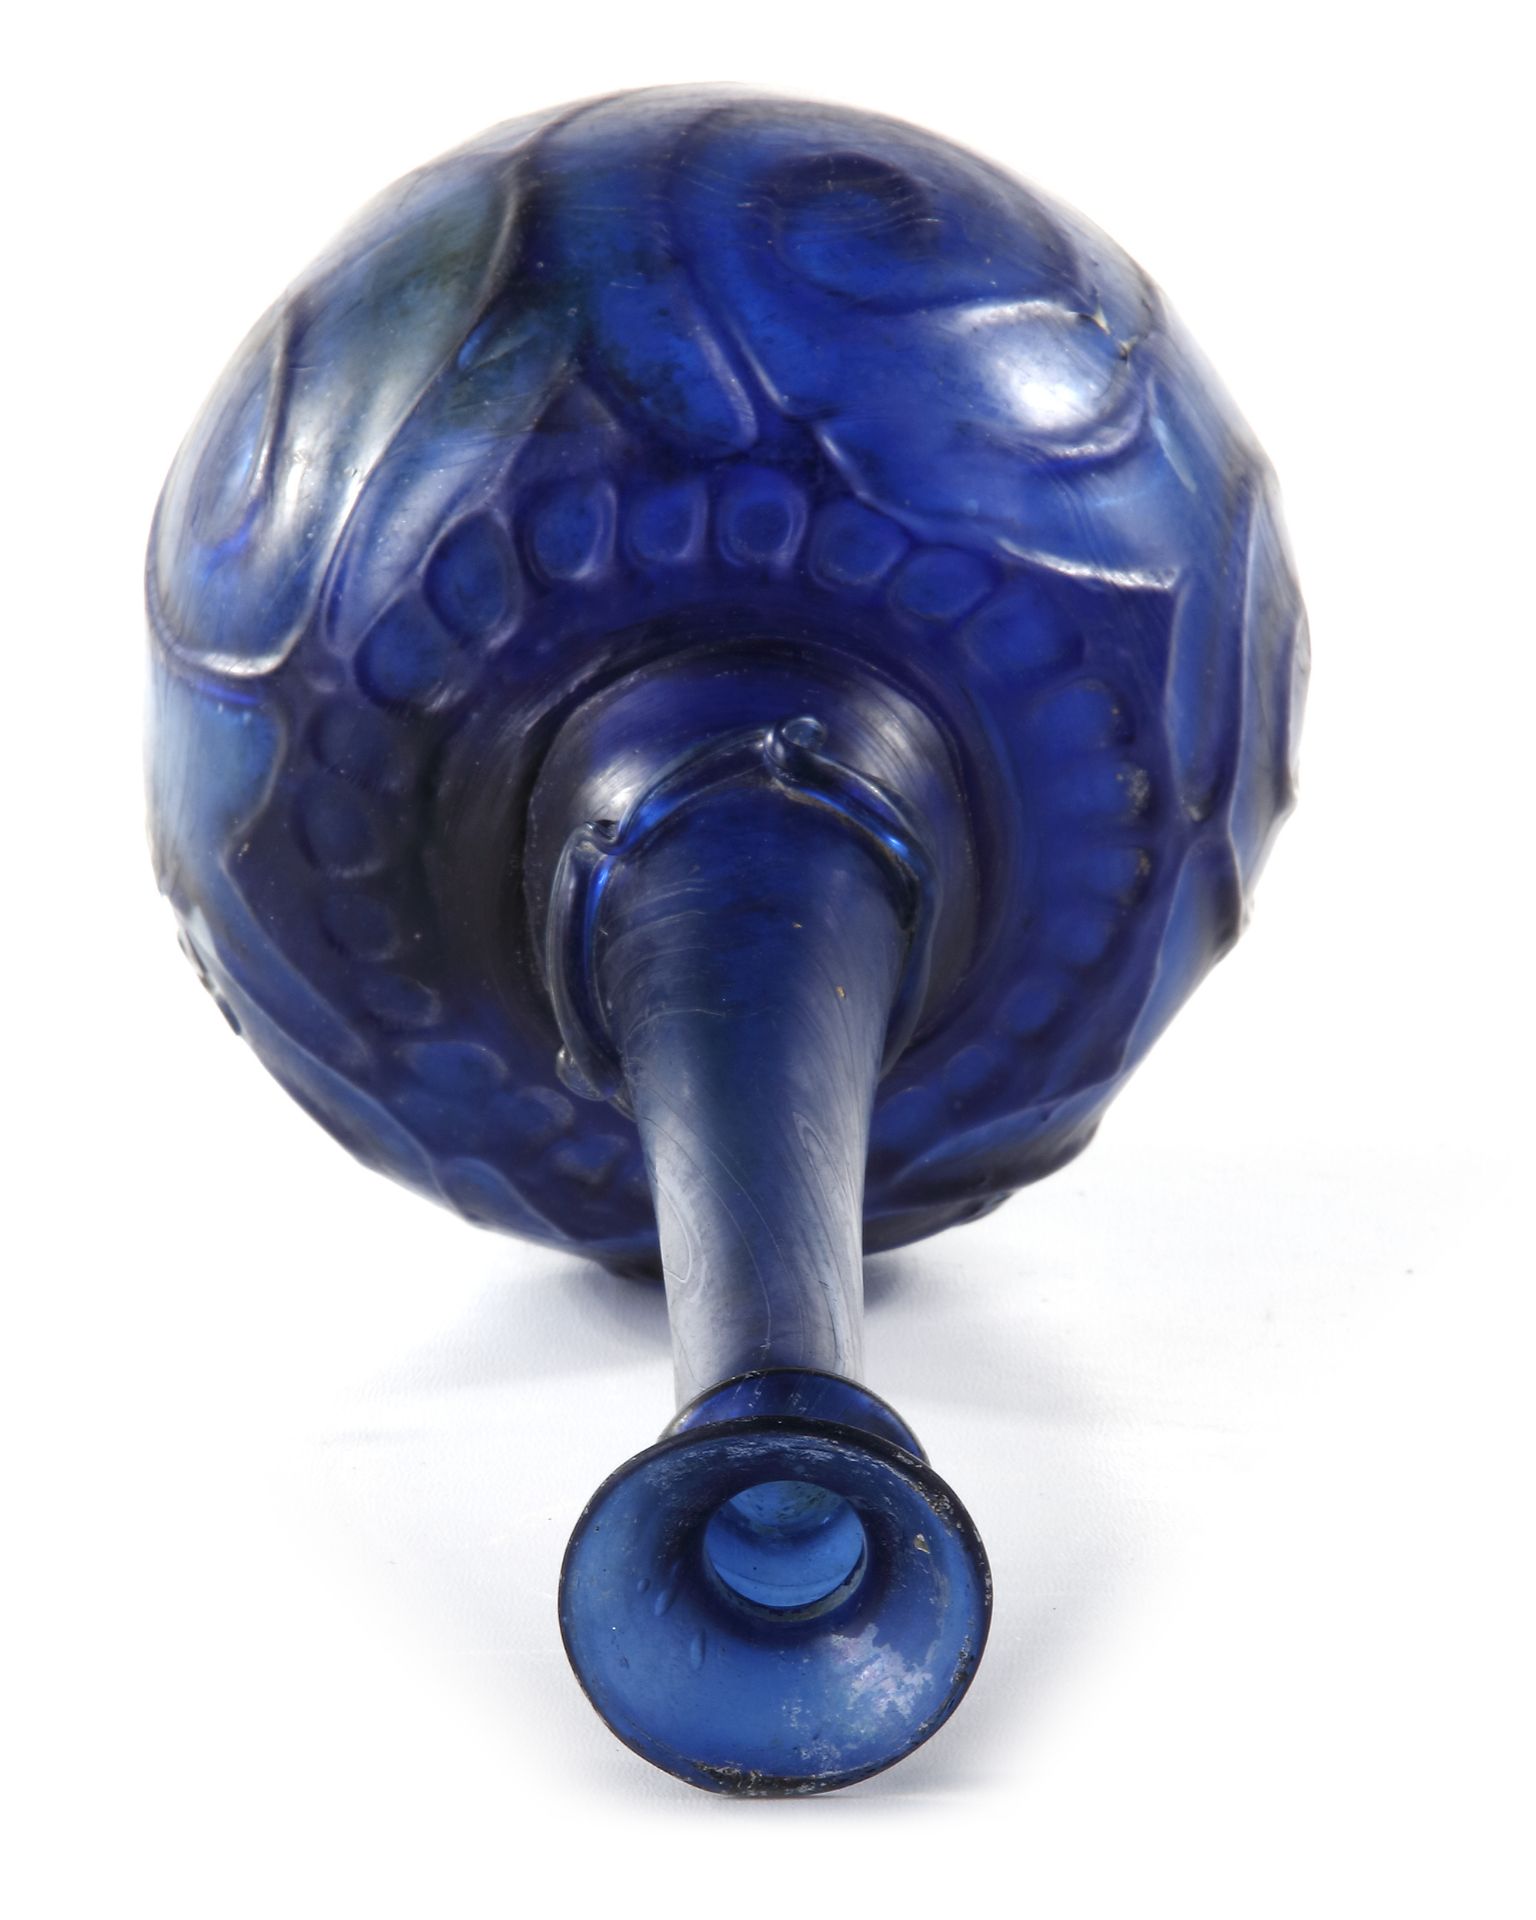 A LARGE MOULD-BLOWN BLUE GLASS BOTTLE-VASE OR SPRINKLER, PERSIA, 12TH CENTURY - Image 4 of 4